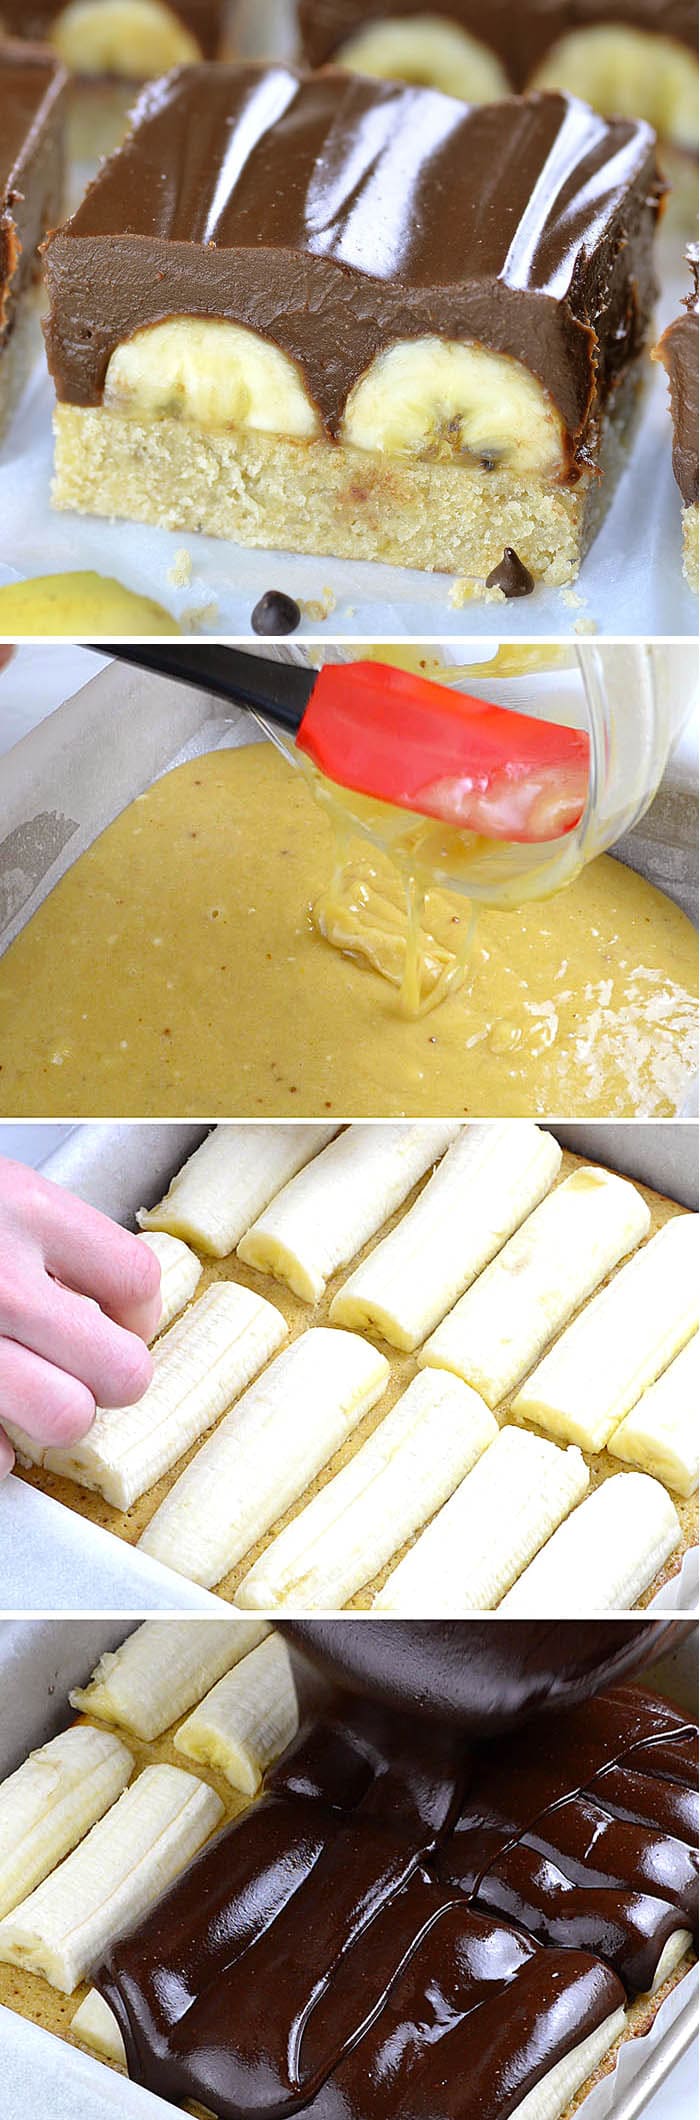 Process of making Chocolate Covered Banana Brownies in 3 steps: Slice bananas in half and arrange over cooled brownies.